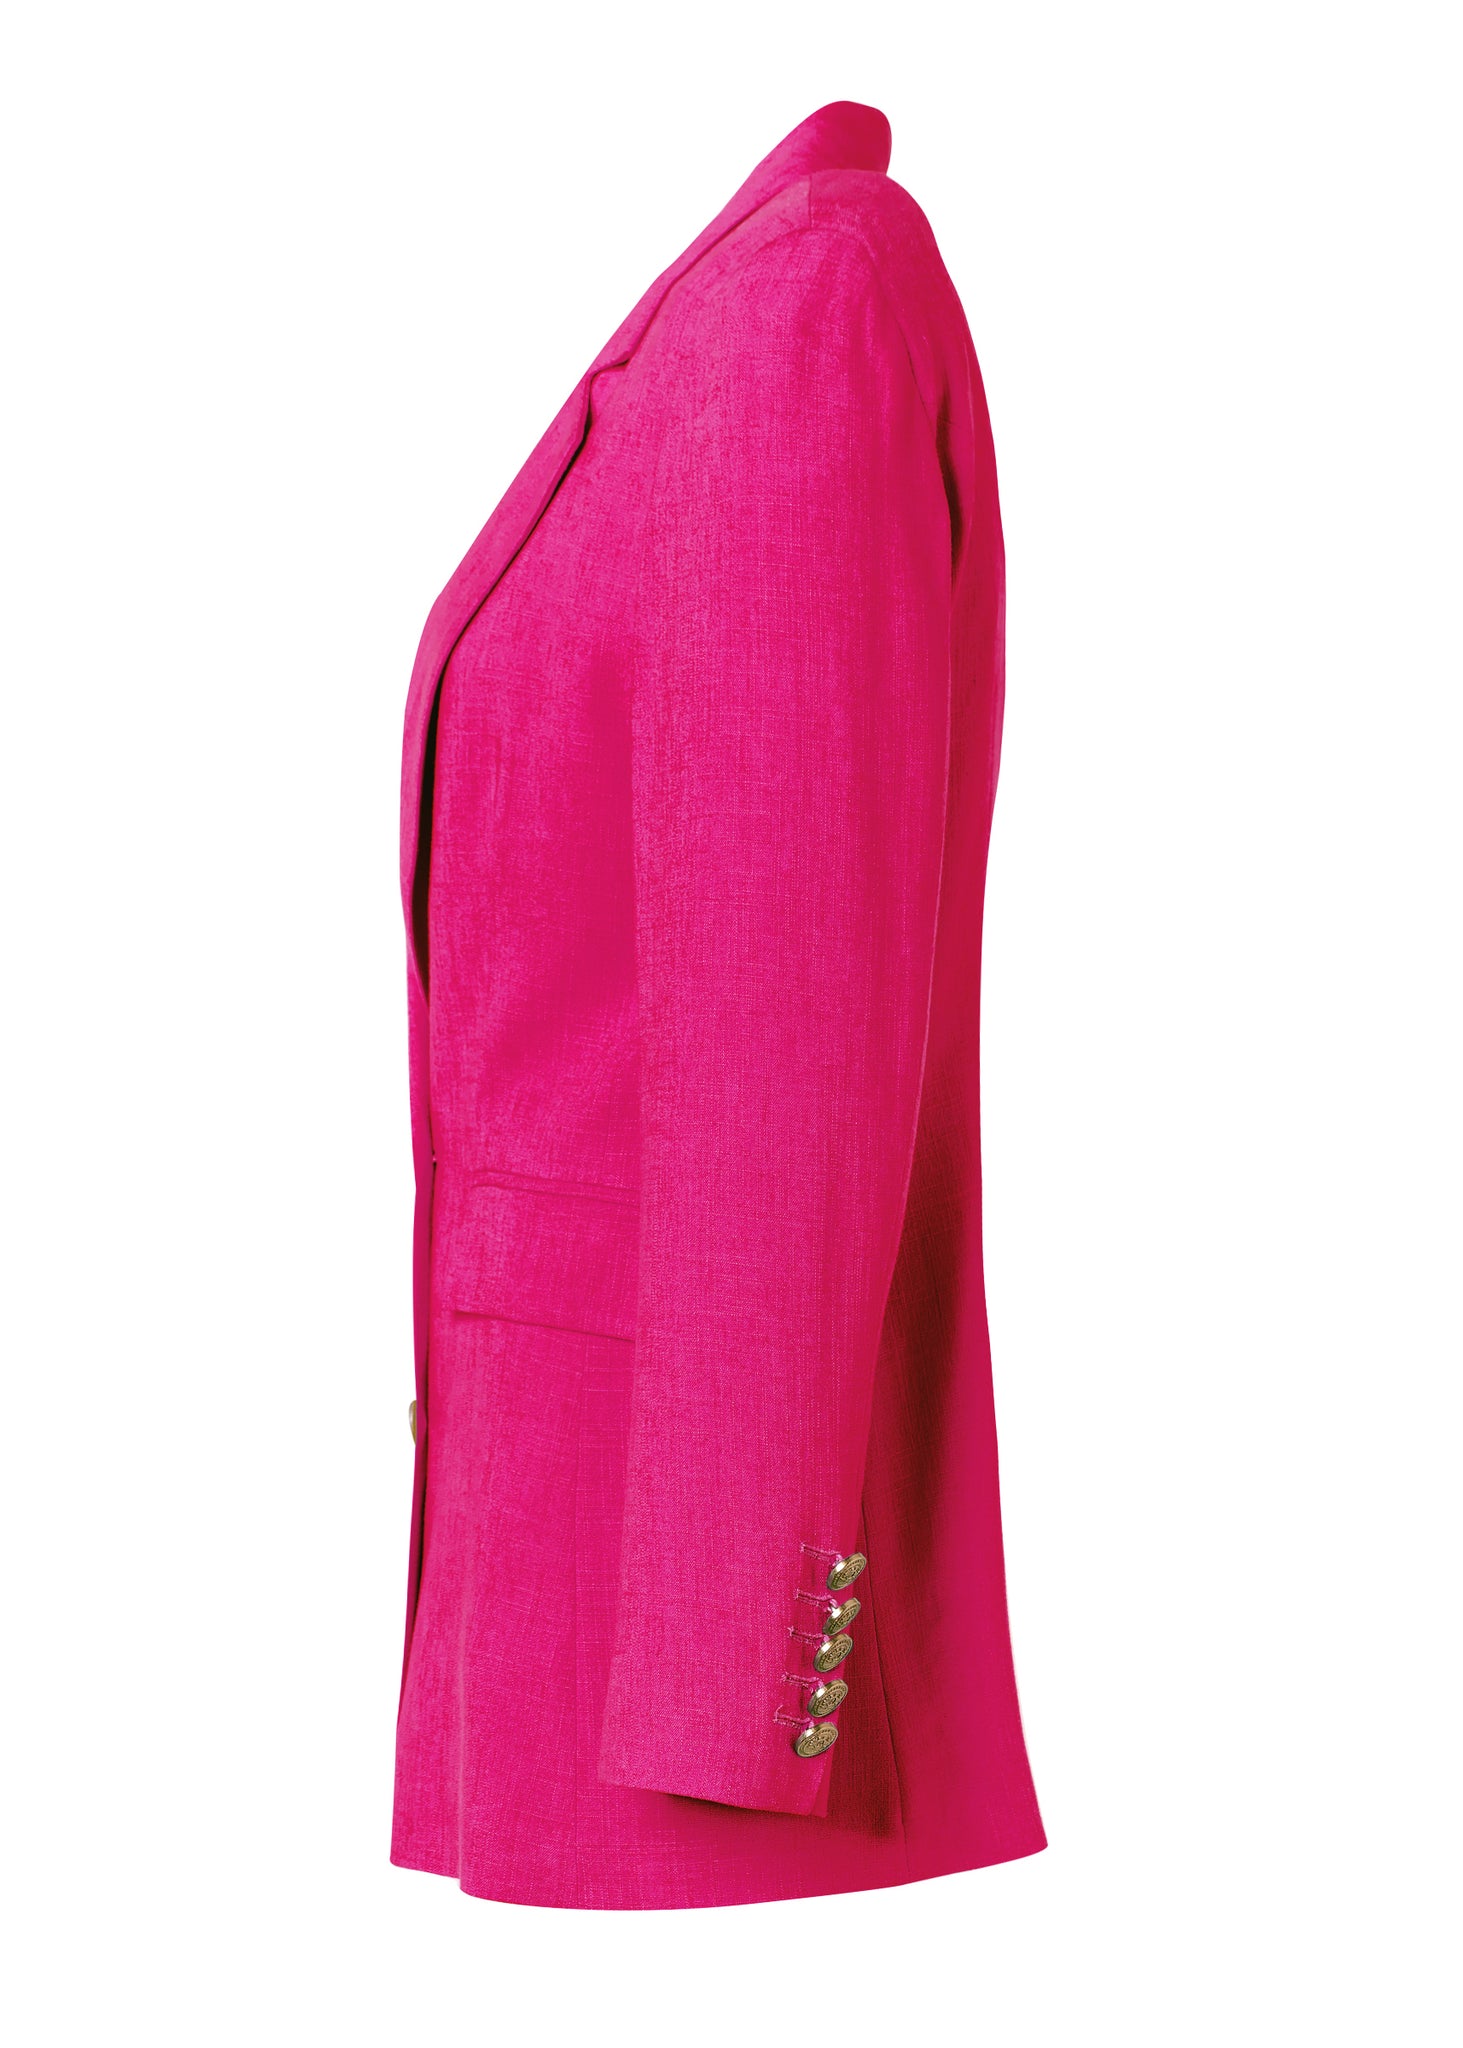 Double Breasted Blazer (Hot Pink Linen)